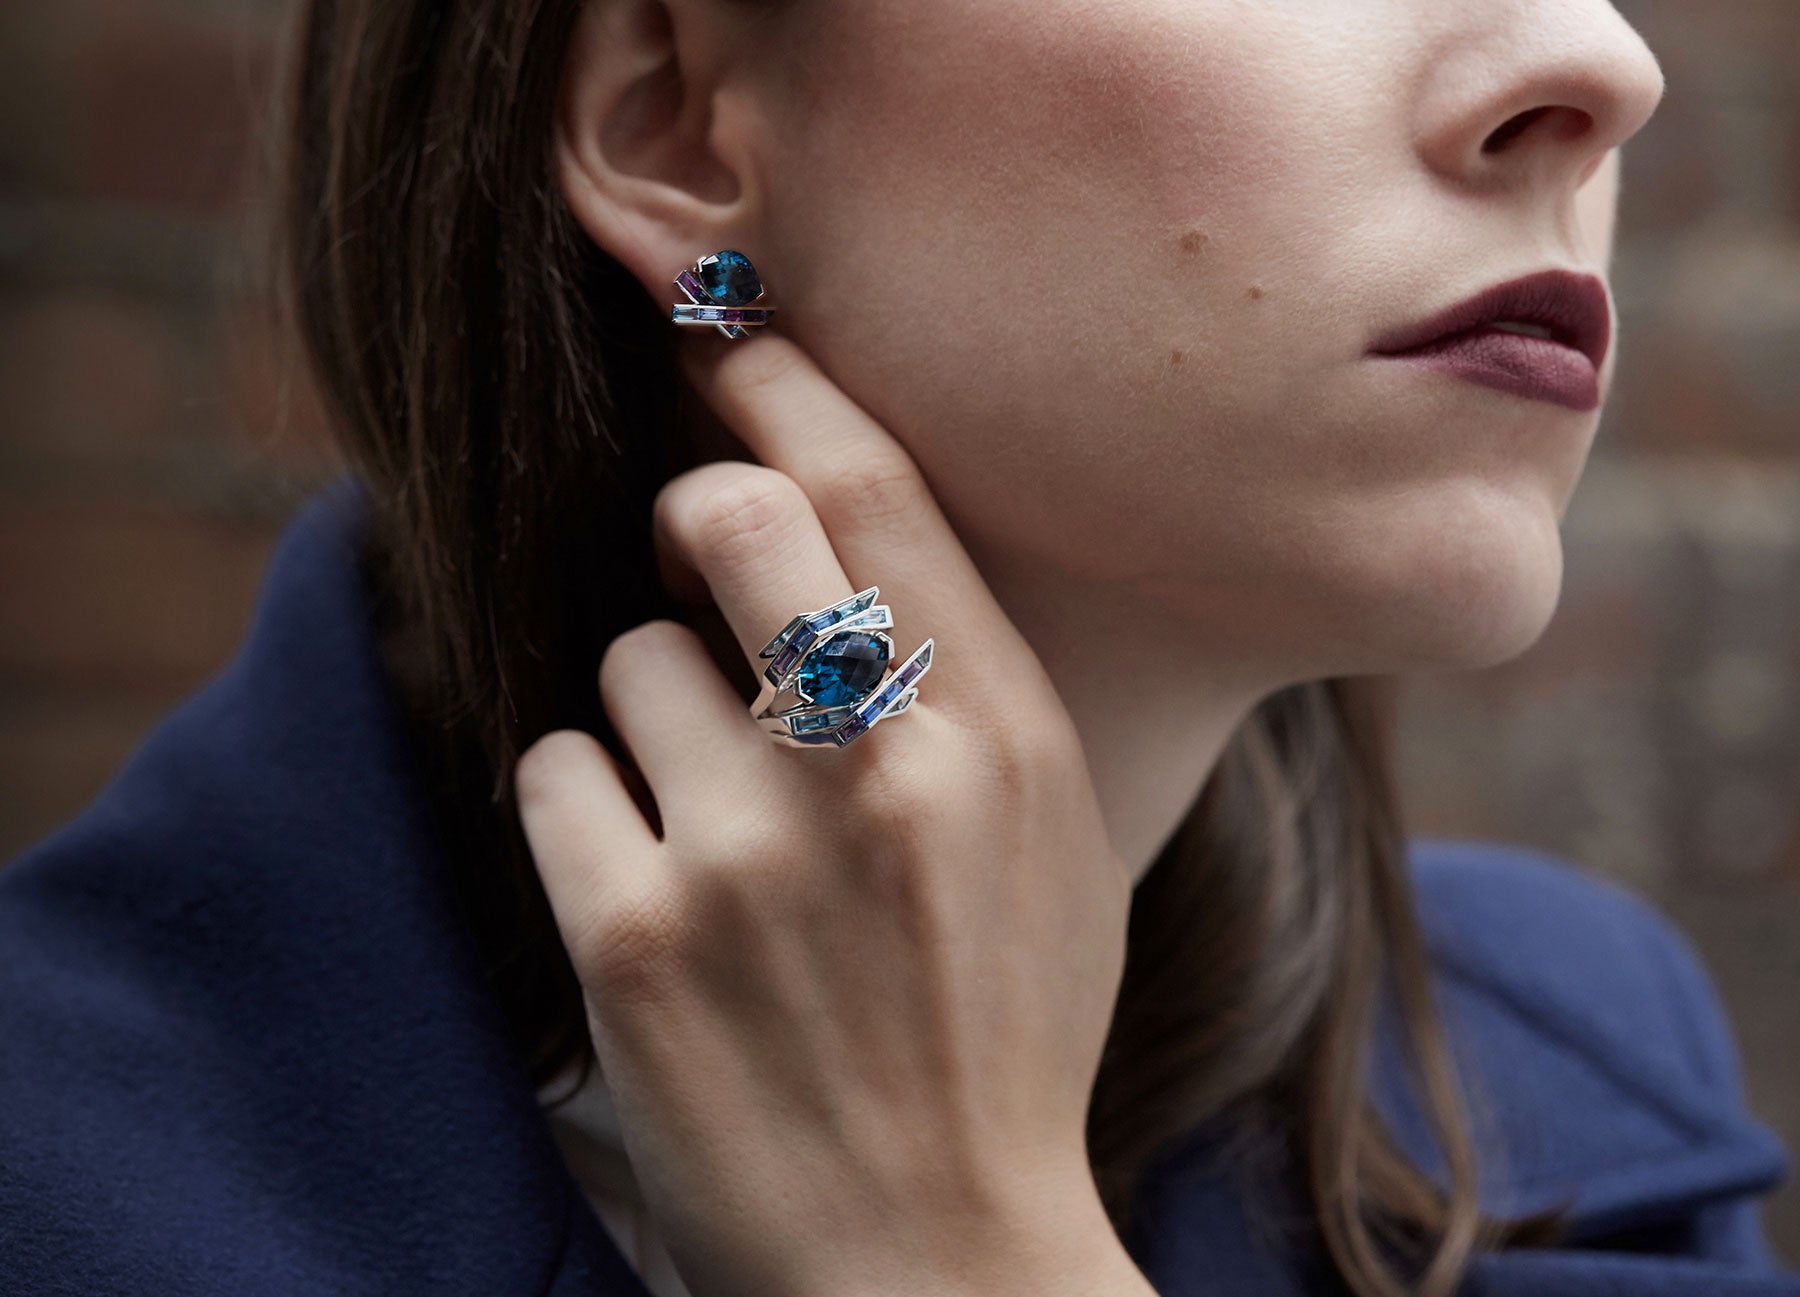 Blue Topaz Cocktail Ring and matching Earring in 18K white Gold worn Fine Jewellery by Tomasz Donocik Edit alt text  Edit alt text